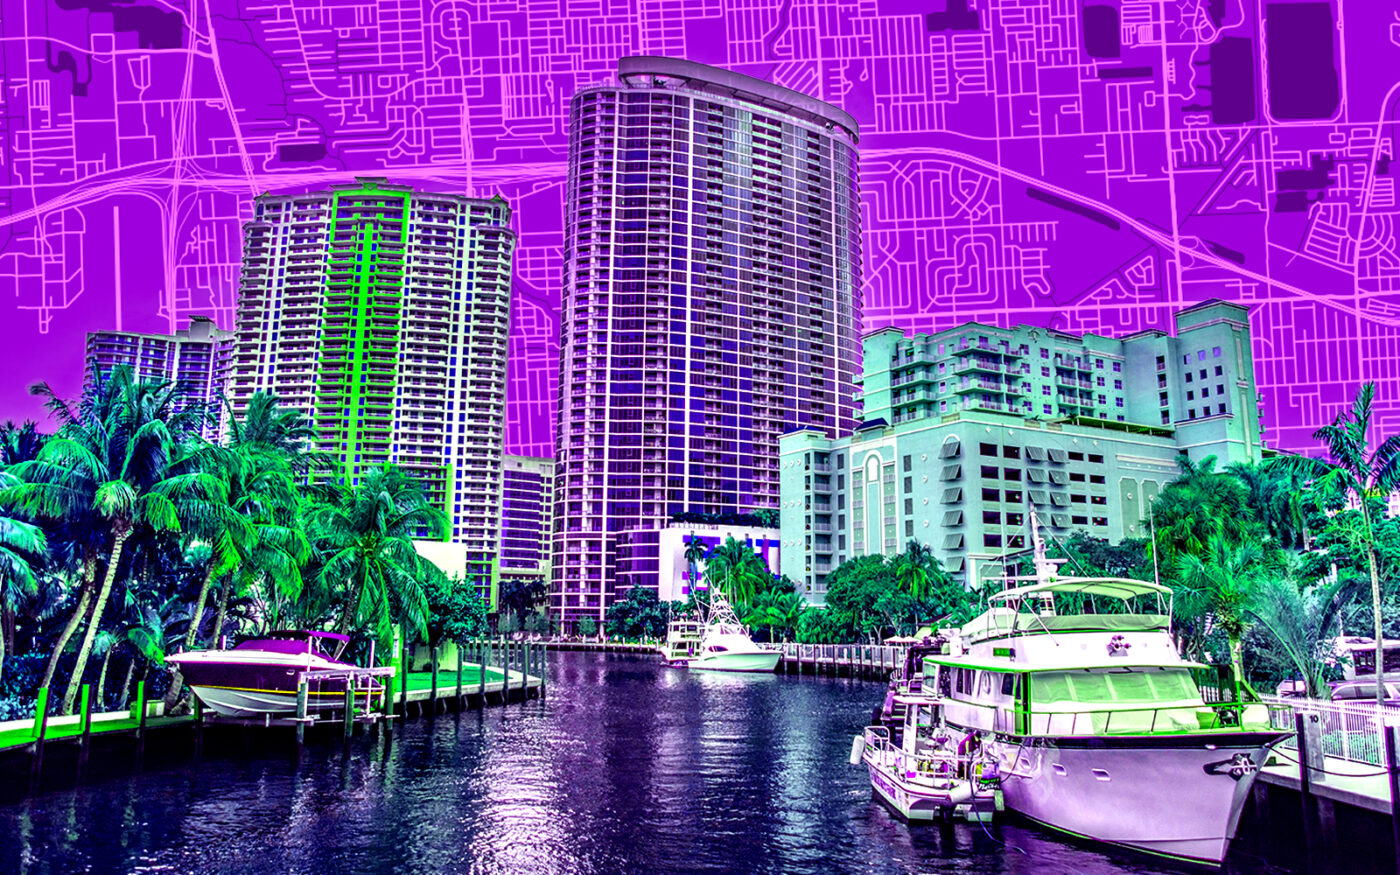 condo sales, One24 Residences, Broward County, Fort Lauderdale, monthly condo sales